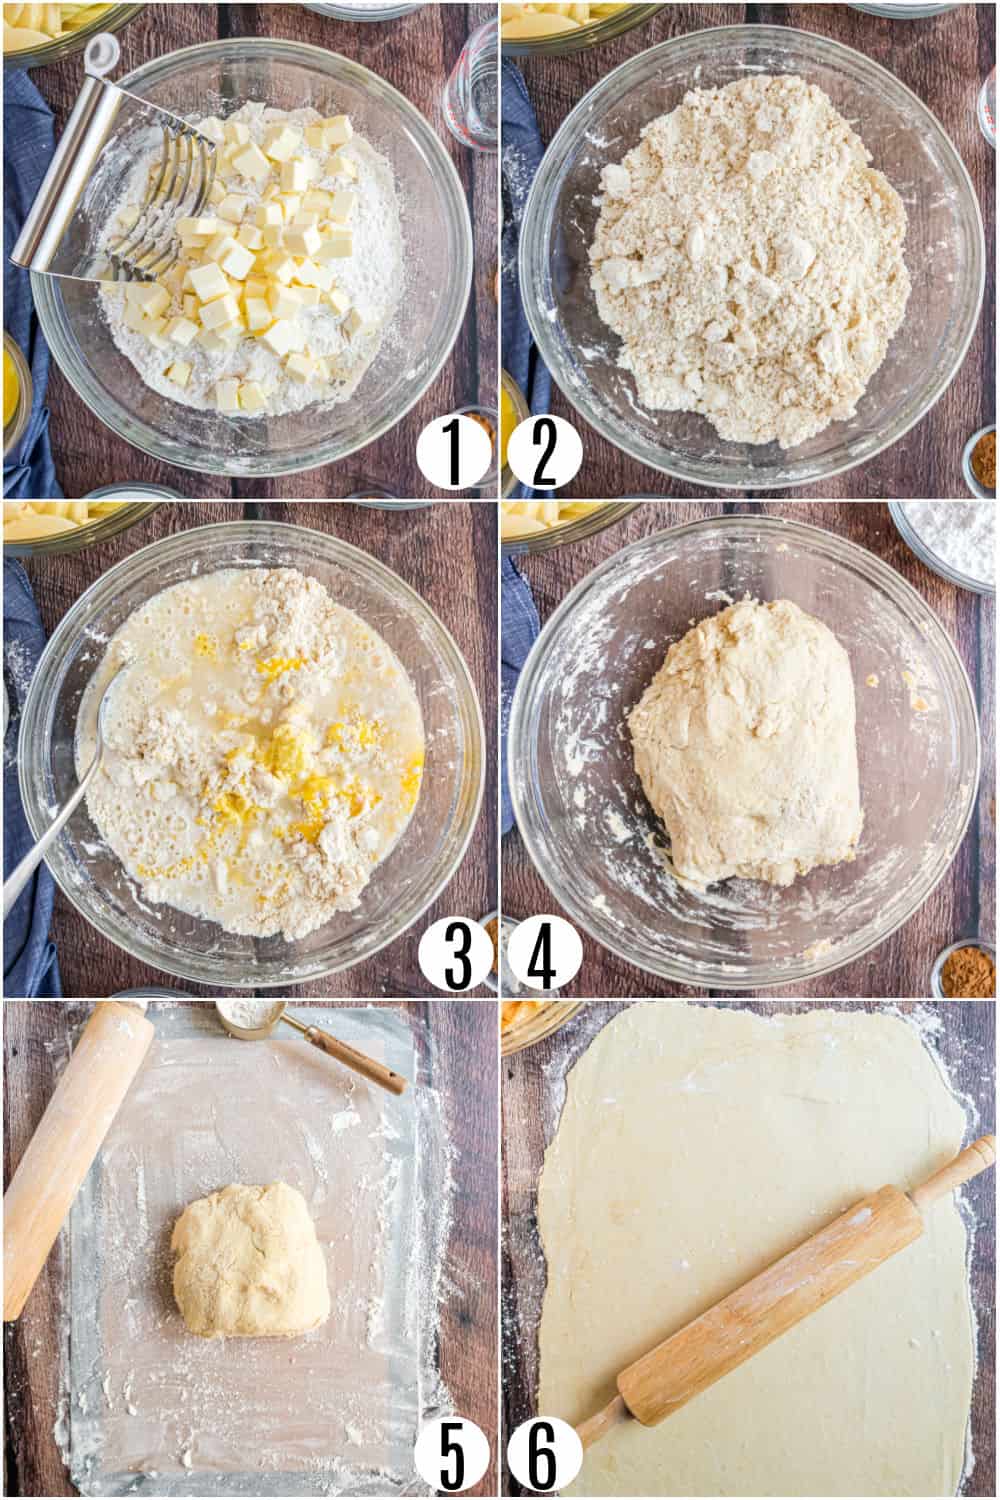 Step by step photos showing how to make pie crust for a slab pie.